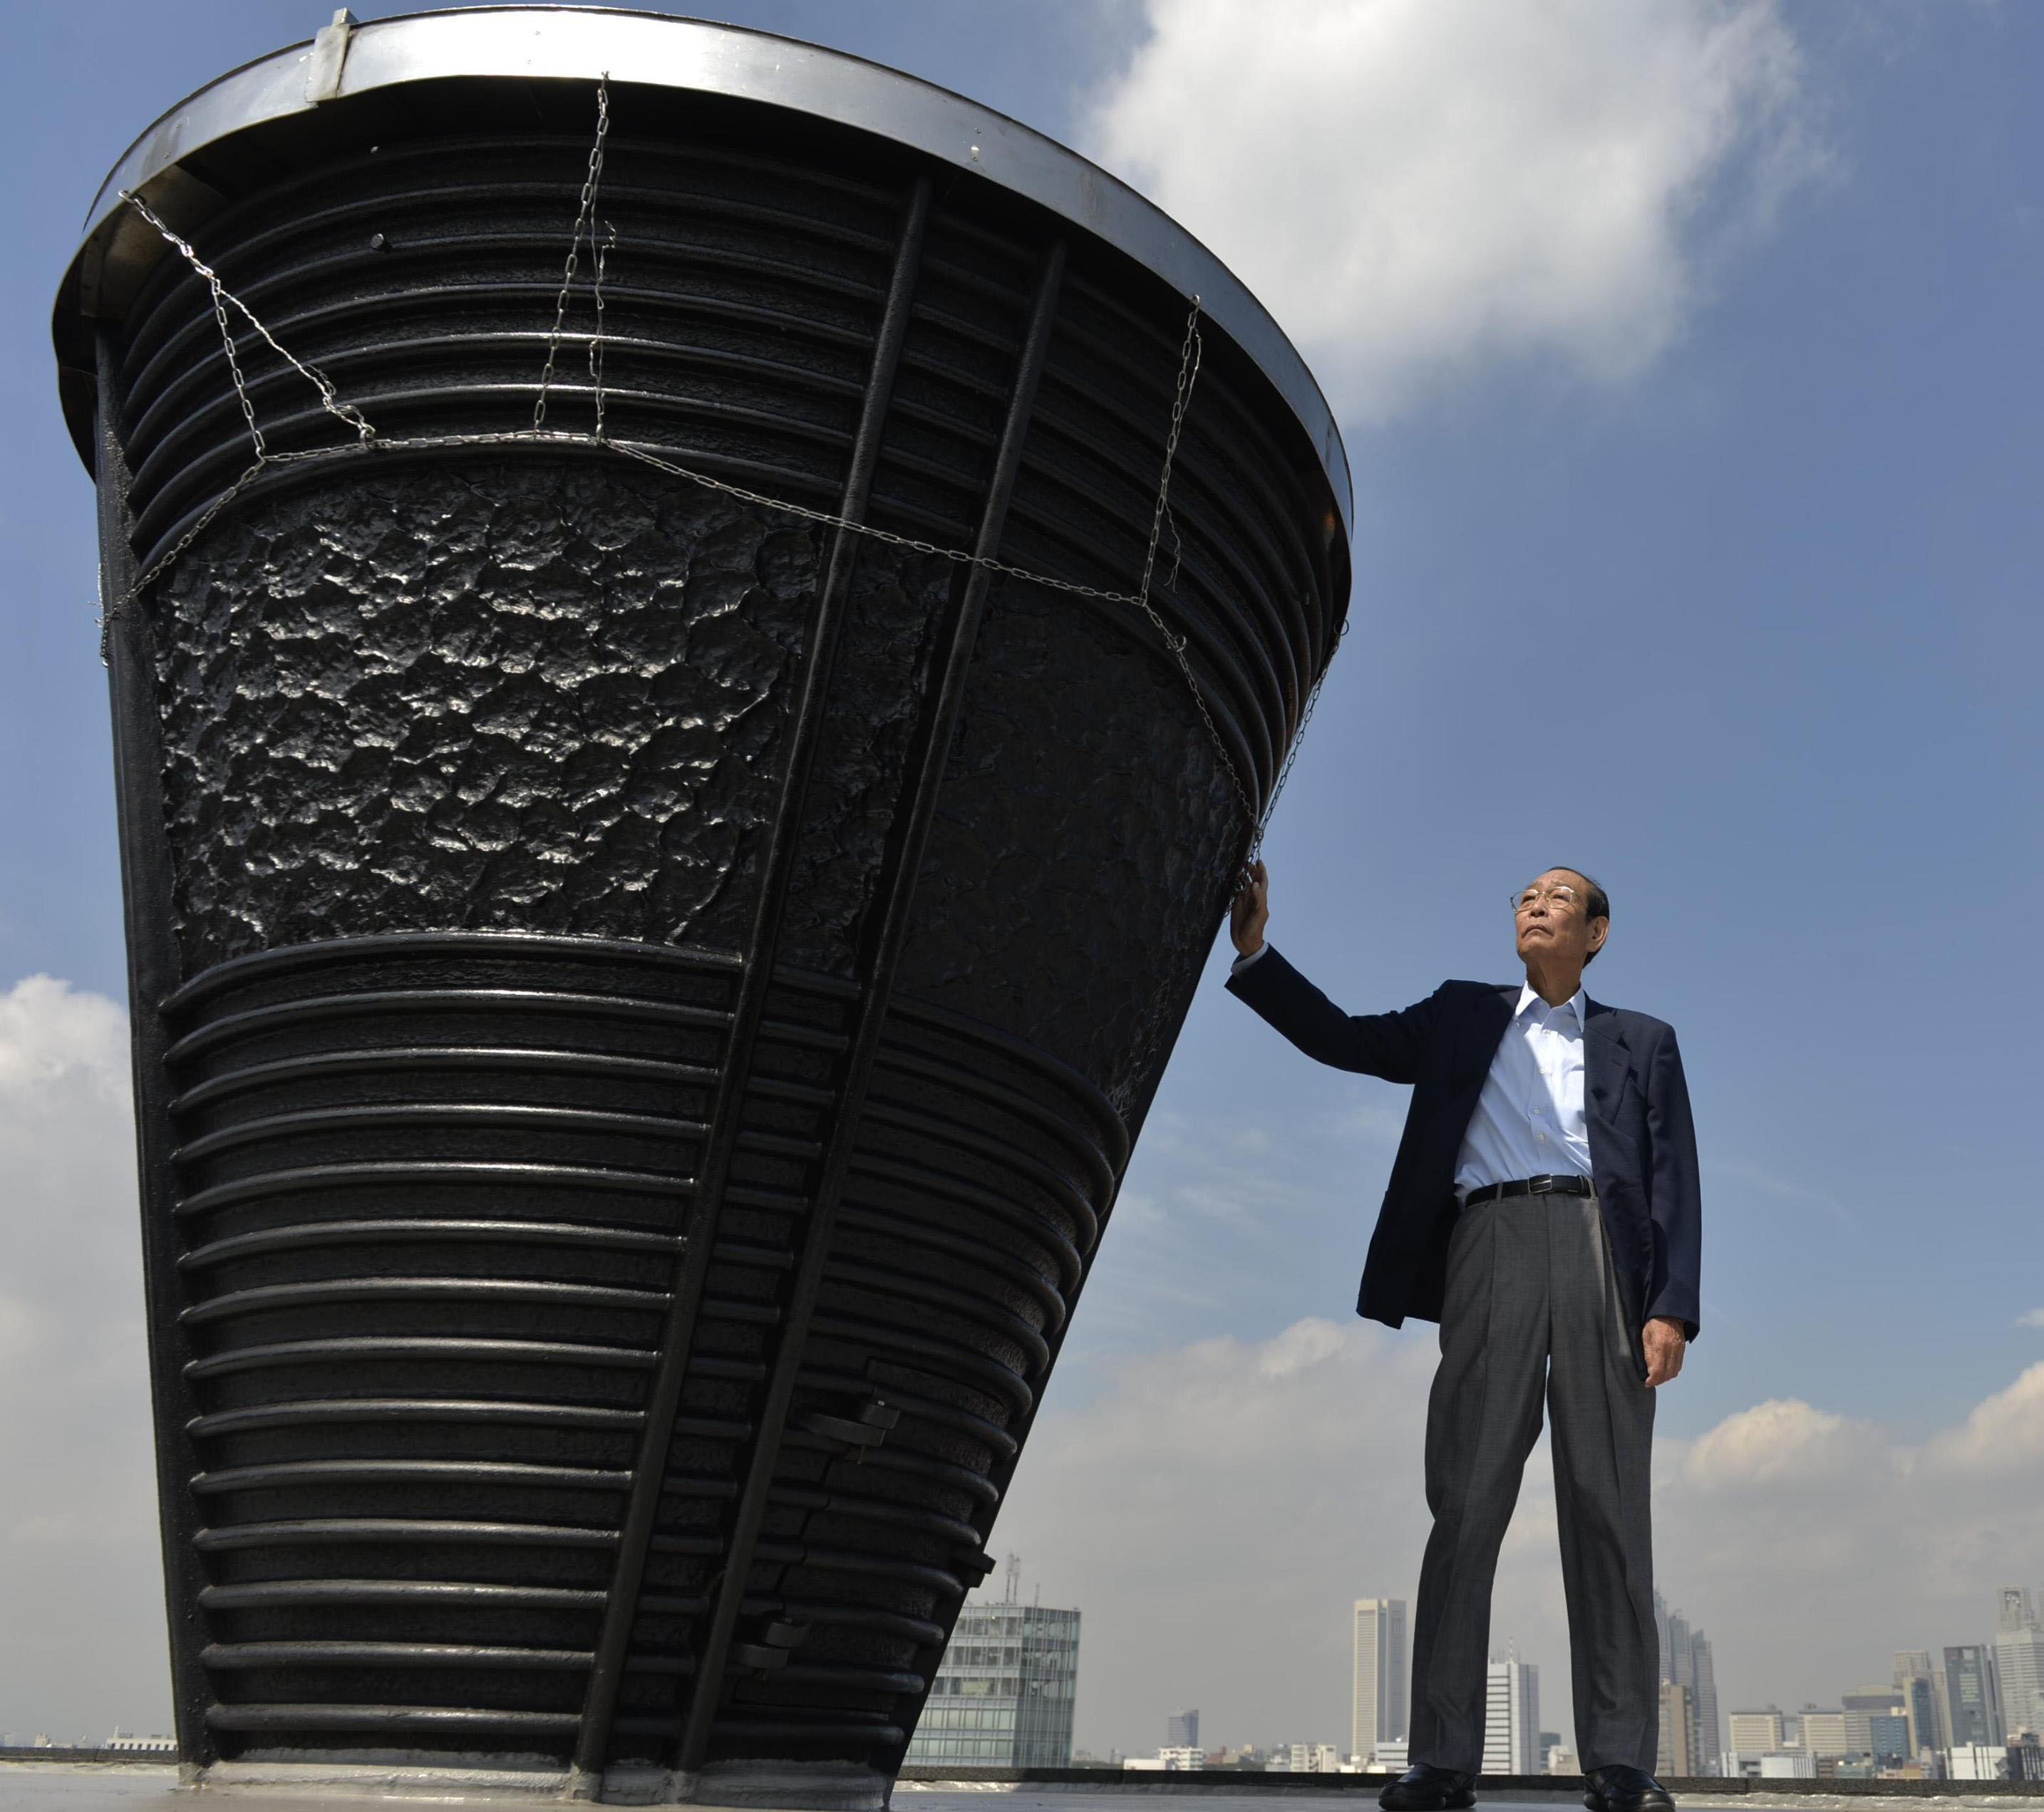 Yoshinori Sakai, who ran the final leg of the torch relay for the 1964 Tokyo Olympics, touches the base of the Olympic torch at National Stadium in Shinjuku Ward in September 2013. | KYODO